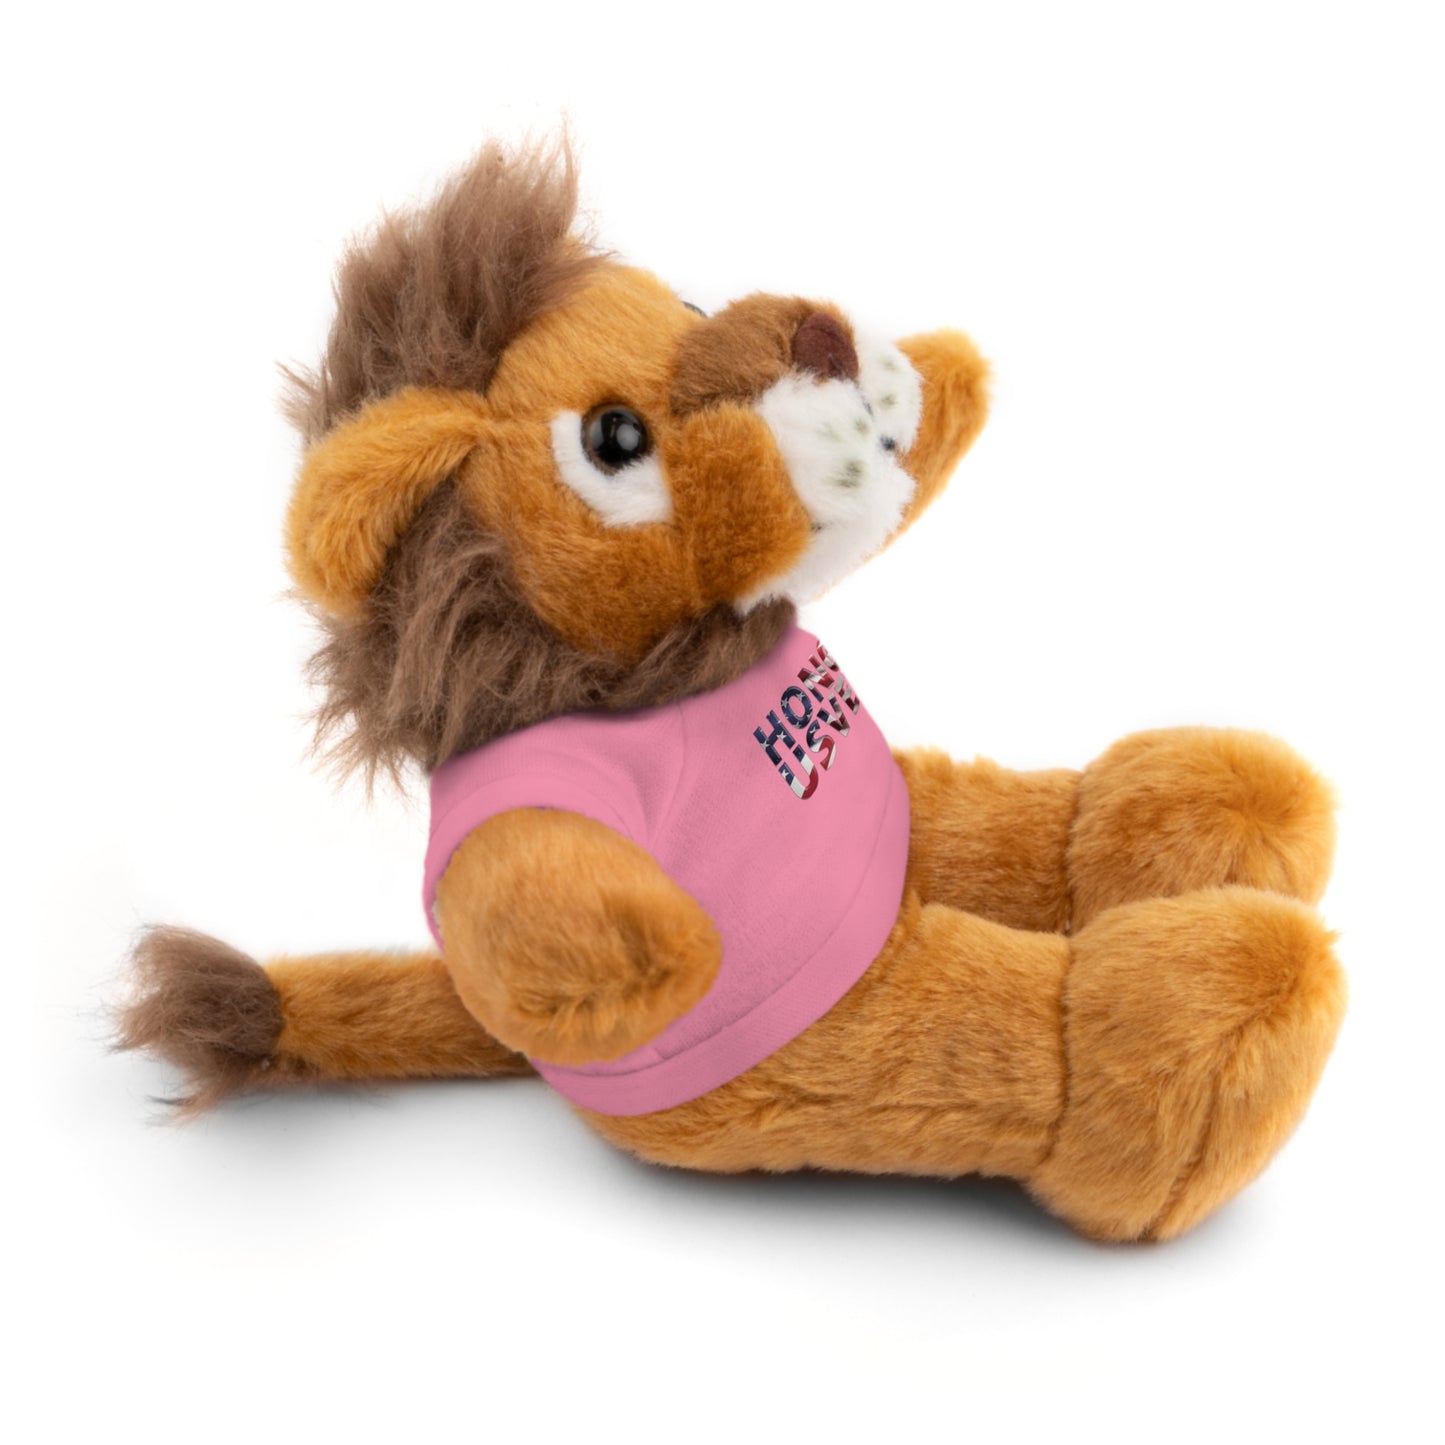 HONORUSVETS Plush Toy with T-Shirt - 5 Choices!